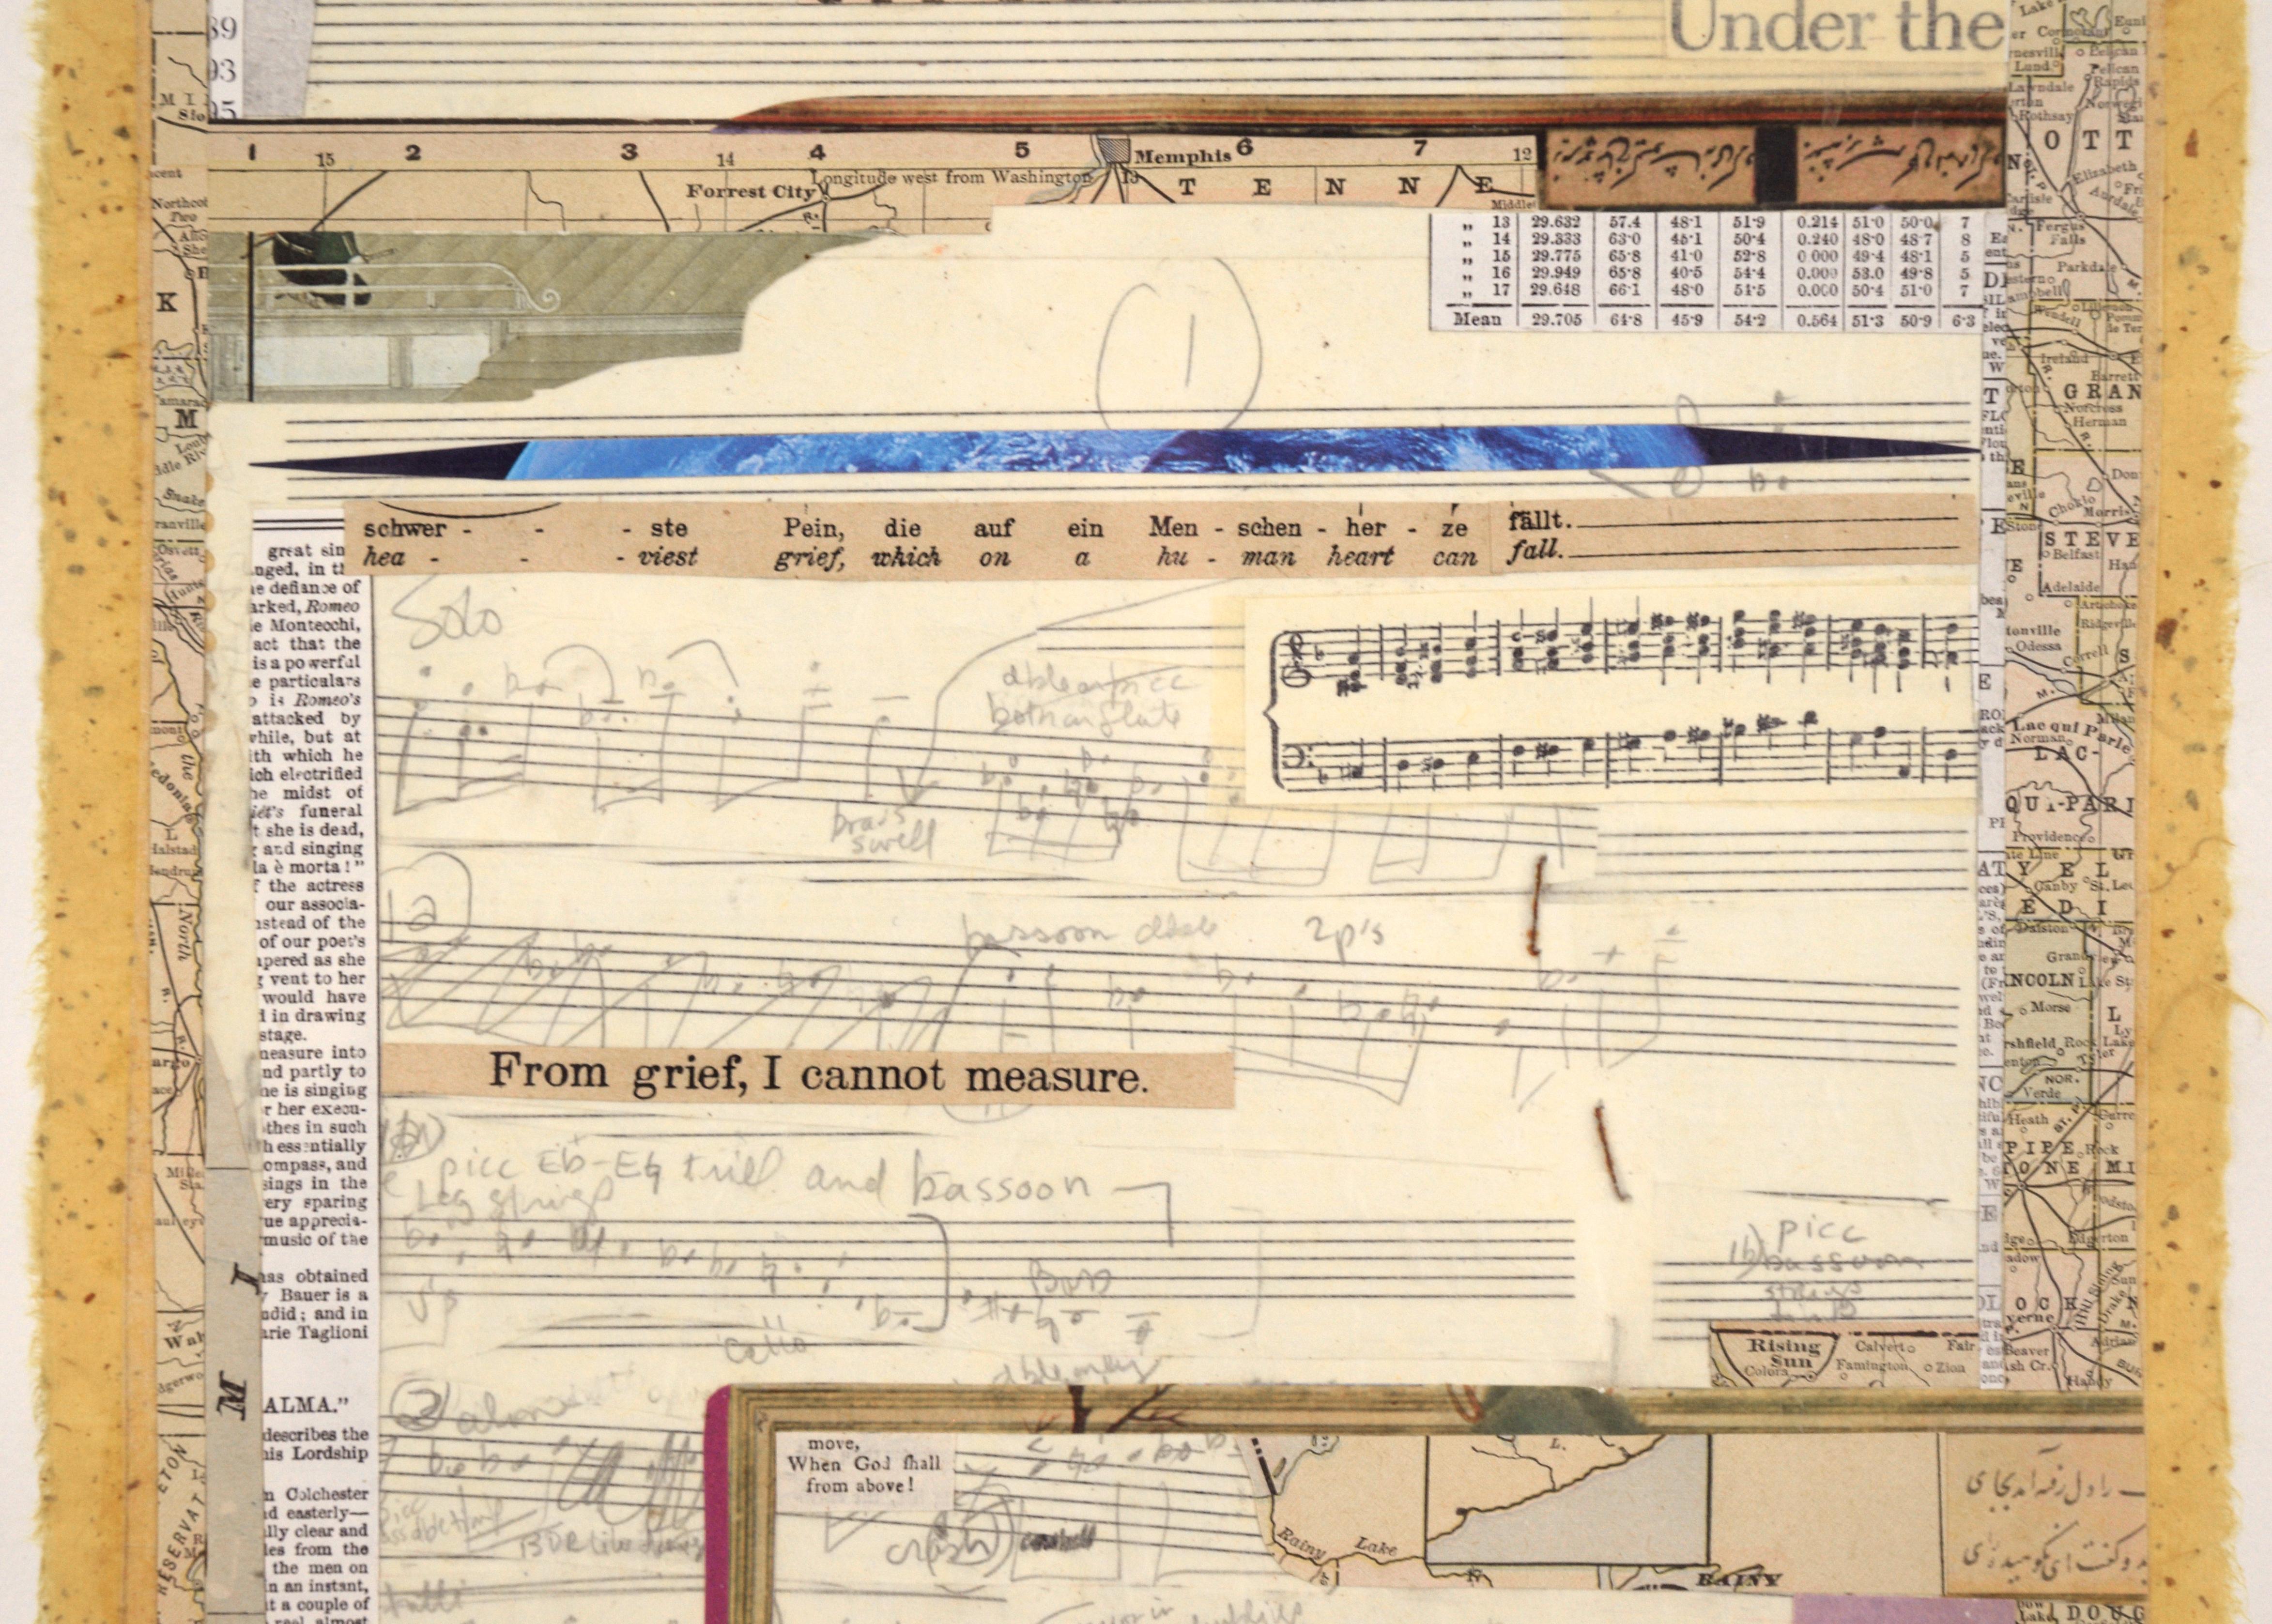 Intricate and layered two-part composition by notable collage artist Graham Moody (American, b. 19XX). Two vertical panels are composed primarily of handwritten musical scores and notations, mounted on maps. Layered atop the sheet music art sections